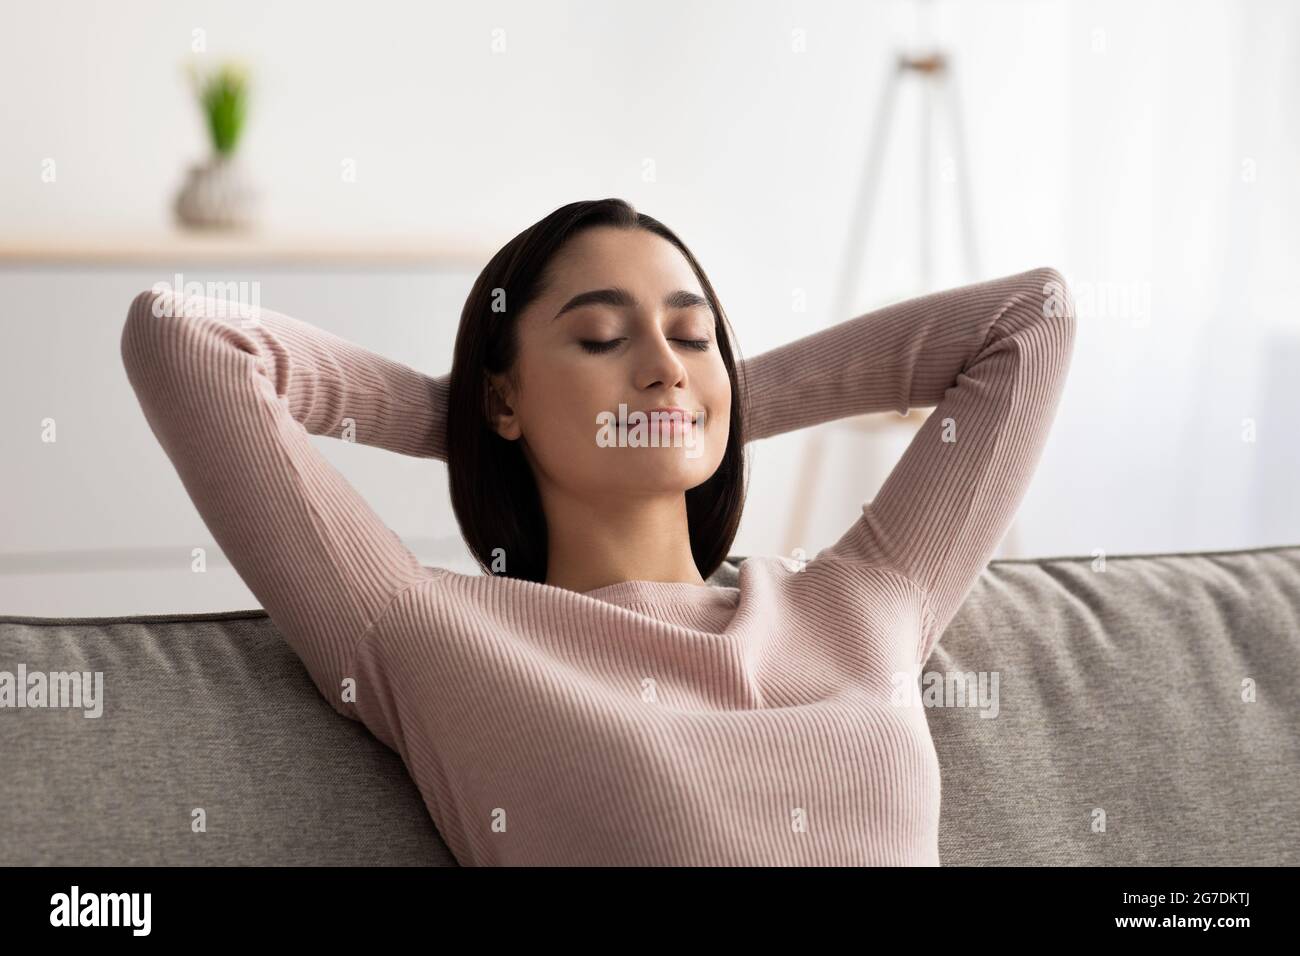 Rest and relax in your own home, enjoy break, positive human emotions Stock Photo